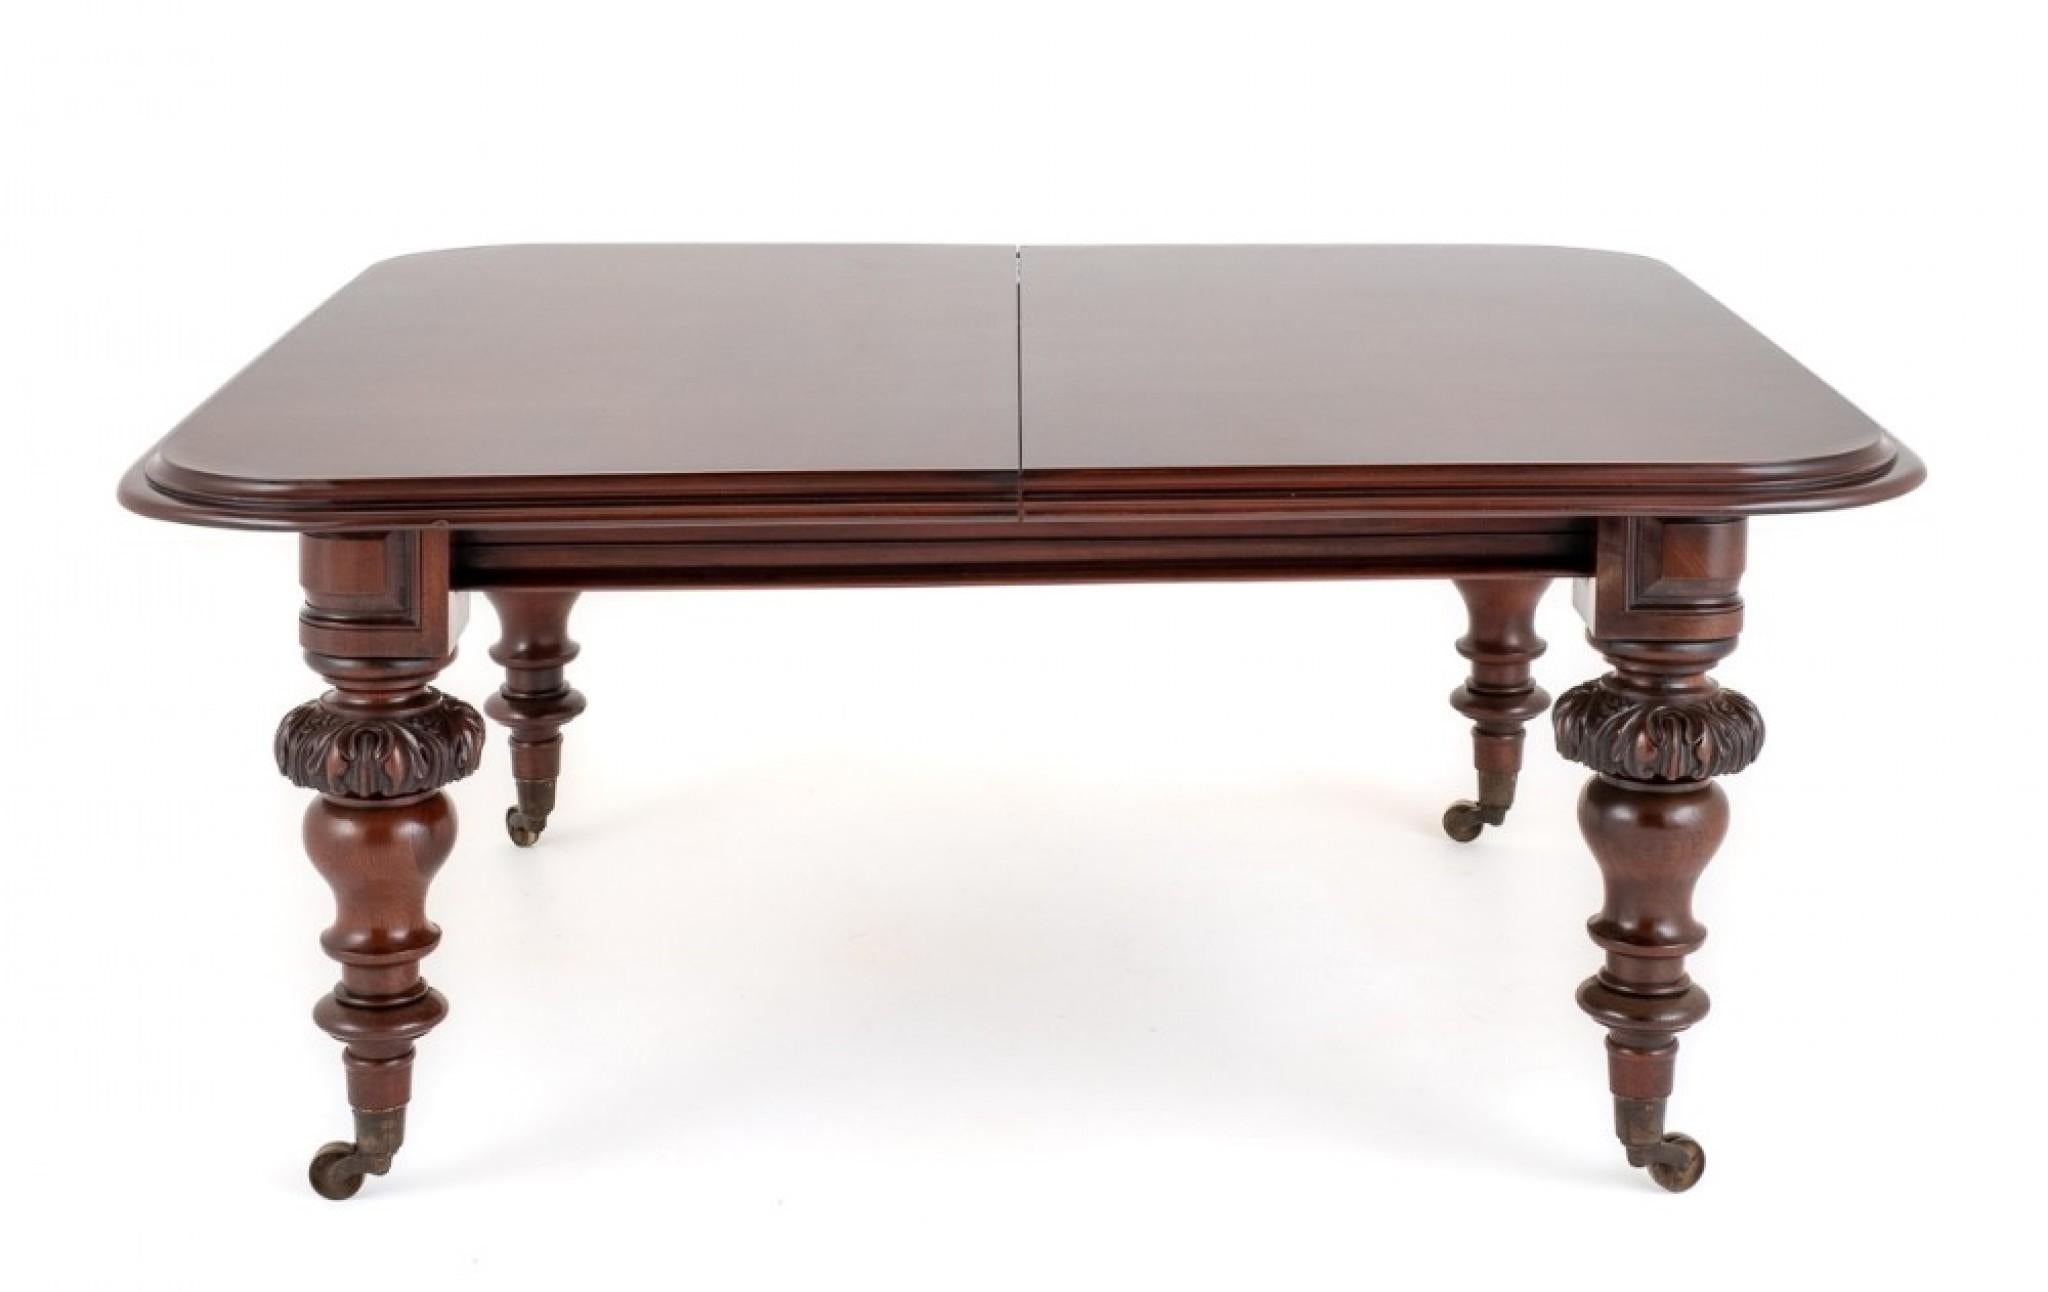 XL Victorian Dining Table Mahogany Extending 20 Seater, 1850 4